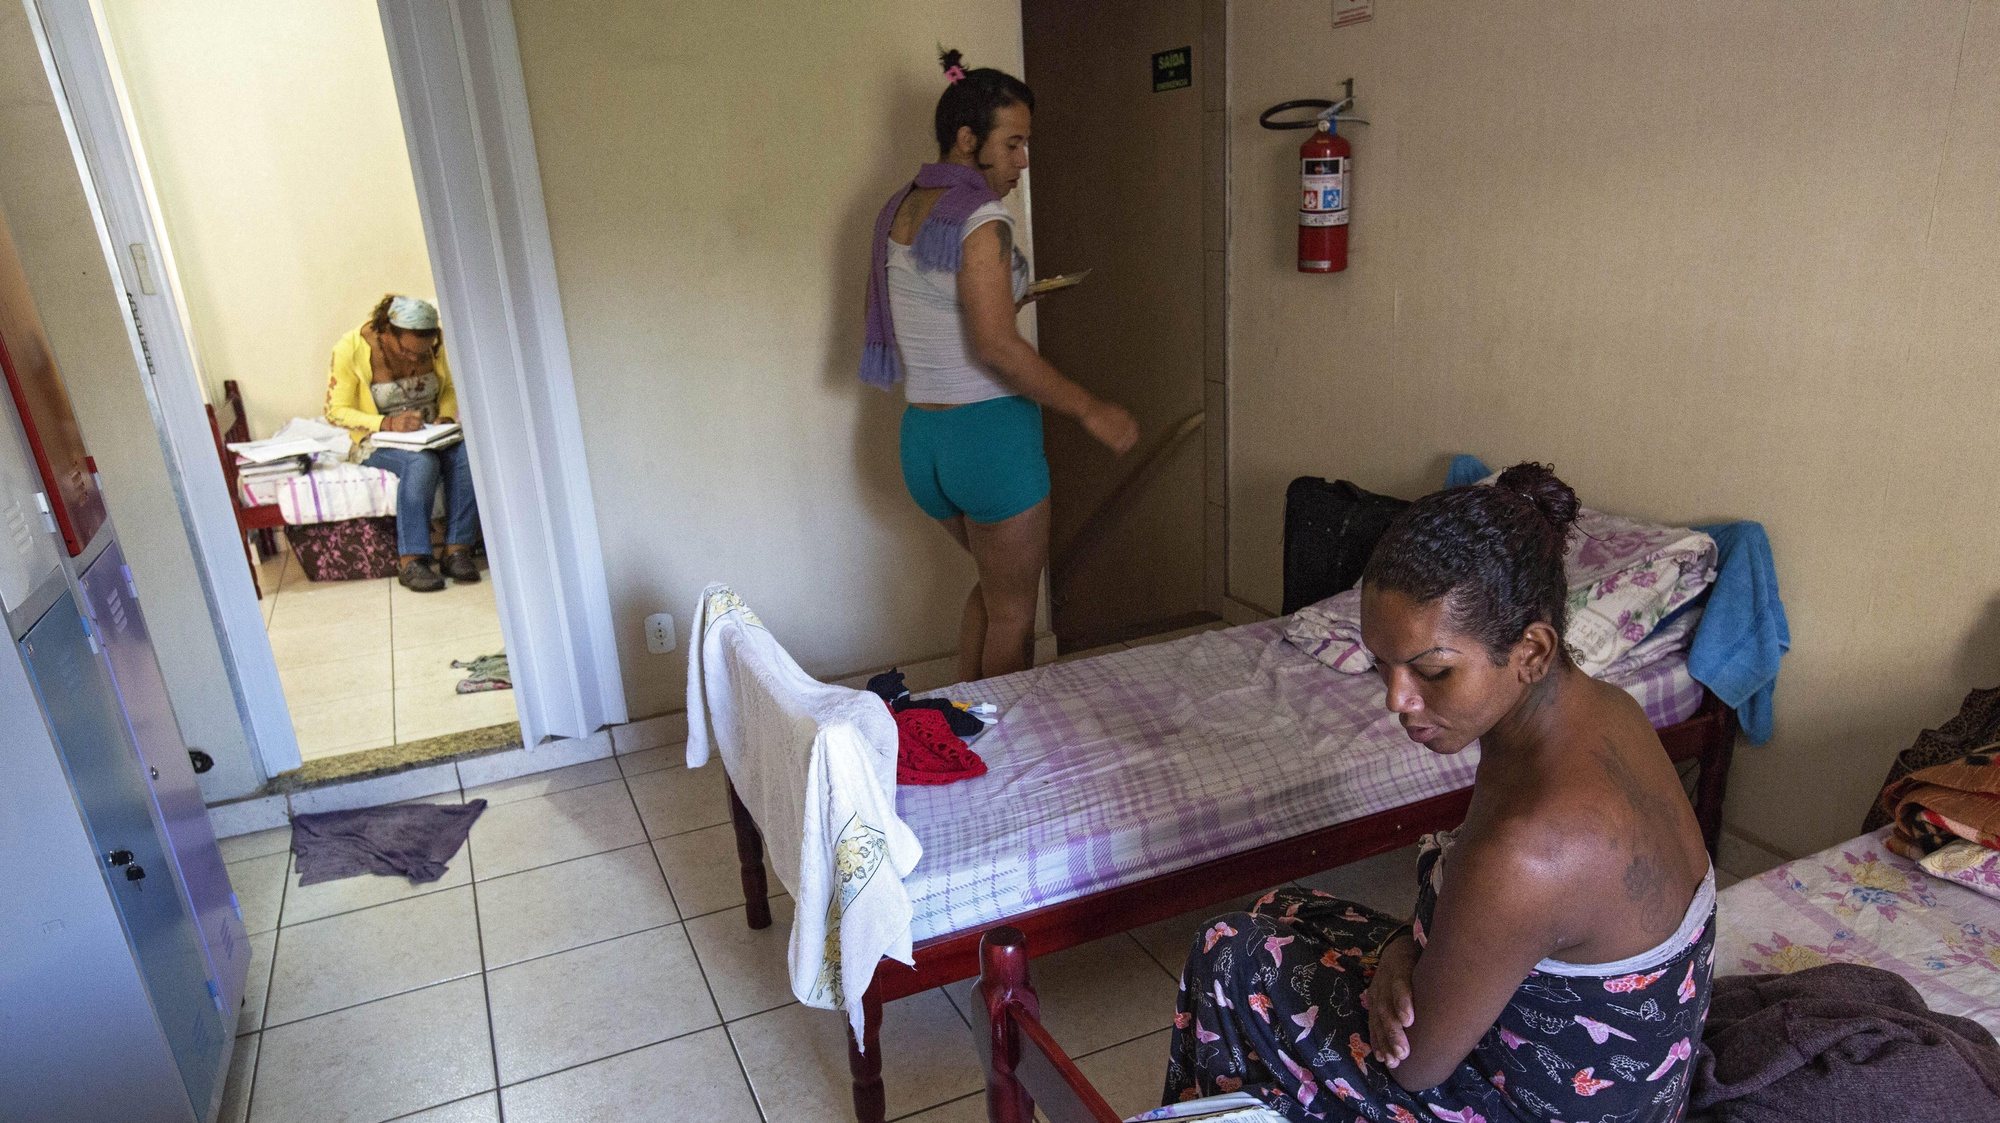 epa05375949 A picture made available on 18 June 2016 shows the transsexuals Janaina (L), Poliana (C) and Ingrid (R) in the &#039;Palace of the Princesses&#039;, a hostel in Sao Paulo, Brazil, 15 June 2016. The hostel for more than three decades has welcome transsexuals and transvestites who have contracted AIDS in a life stricken prostitution and violence.  EPA/SEBASTIAO MOREIRA